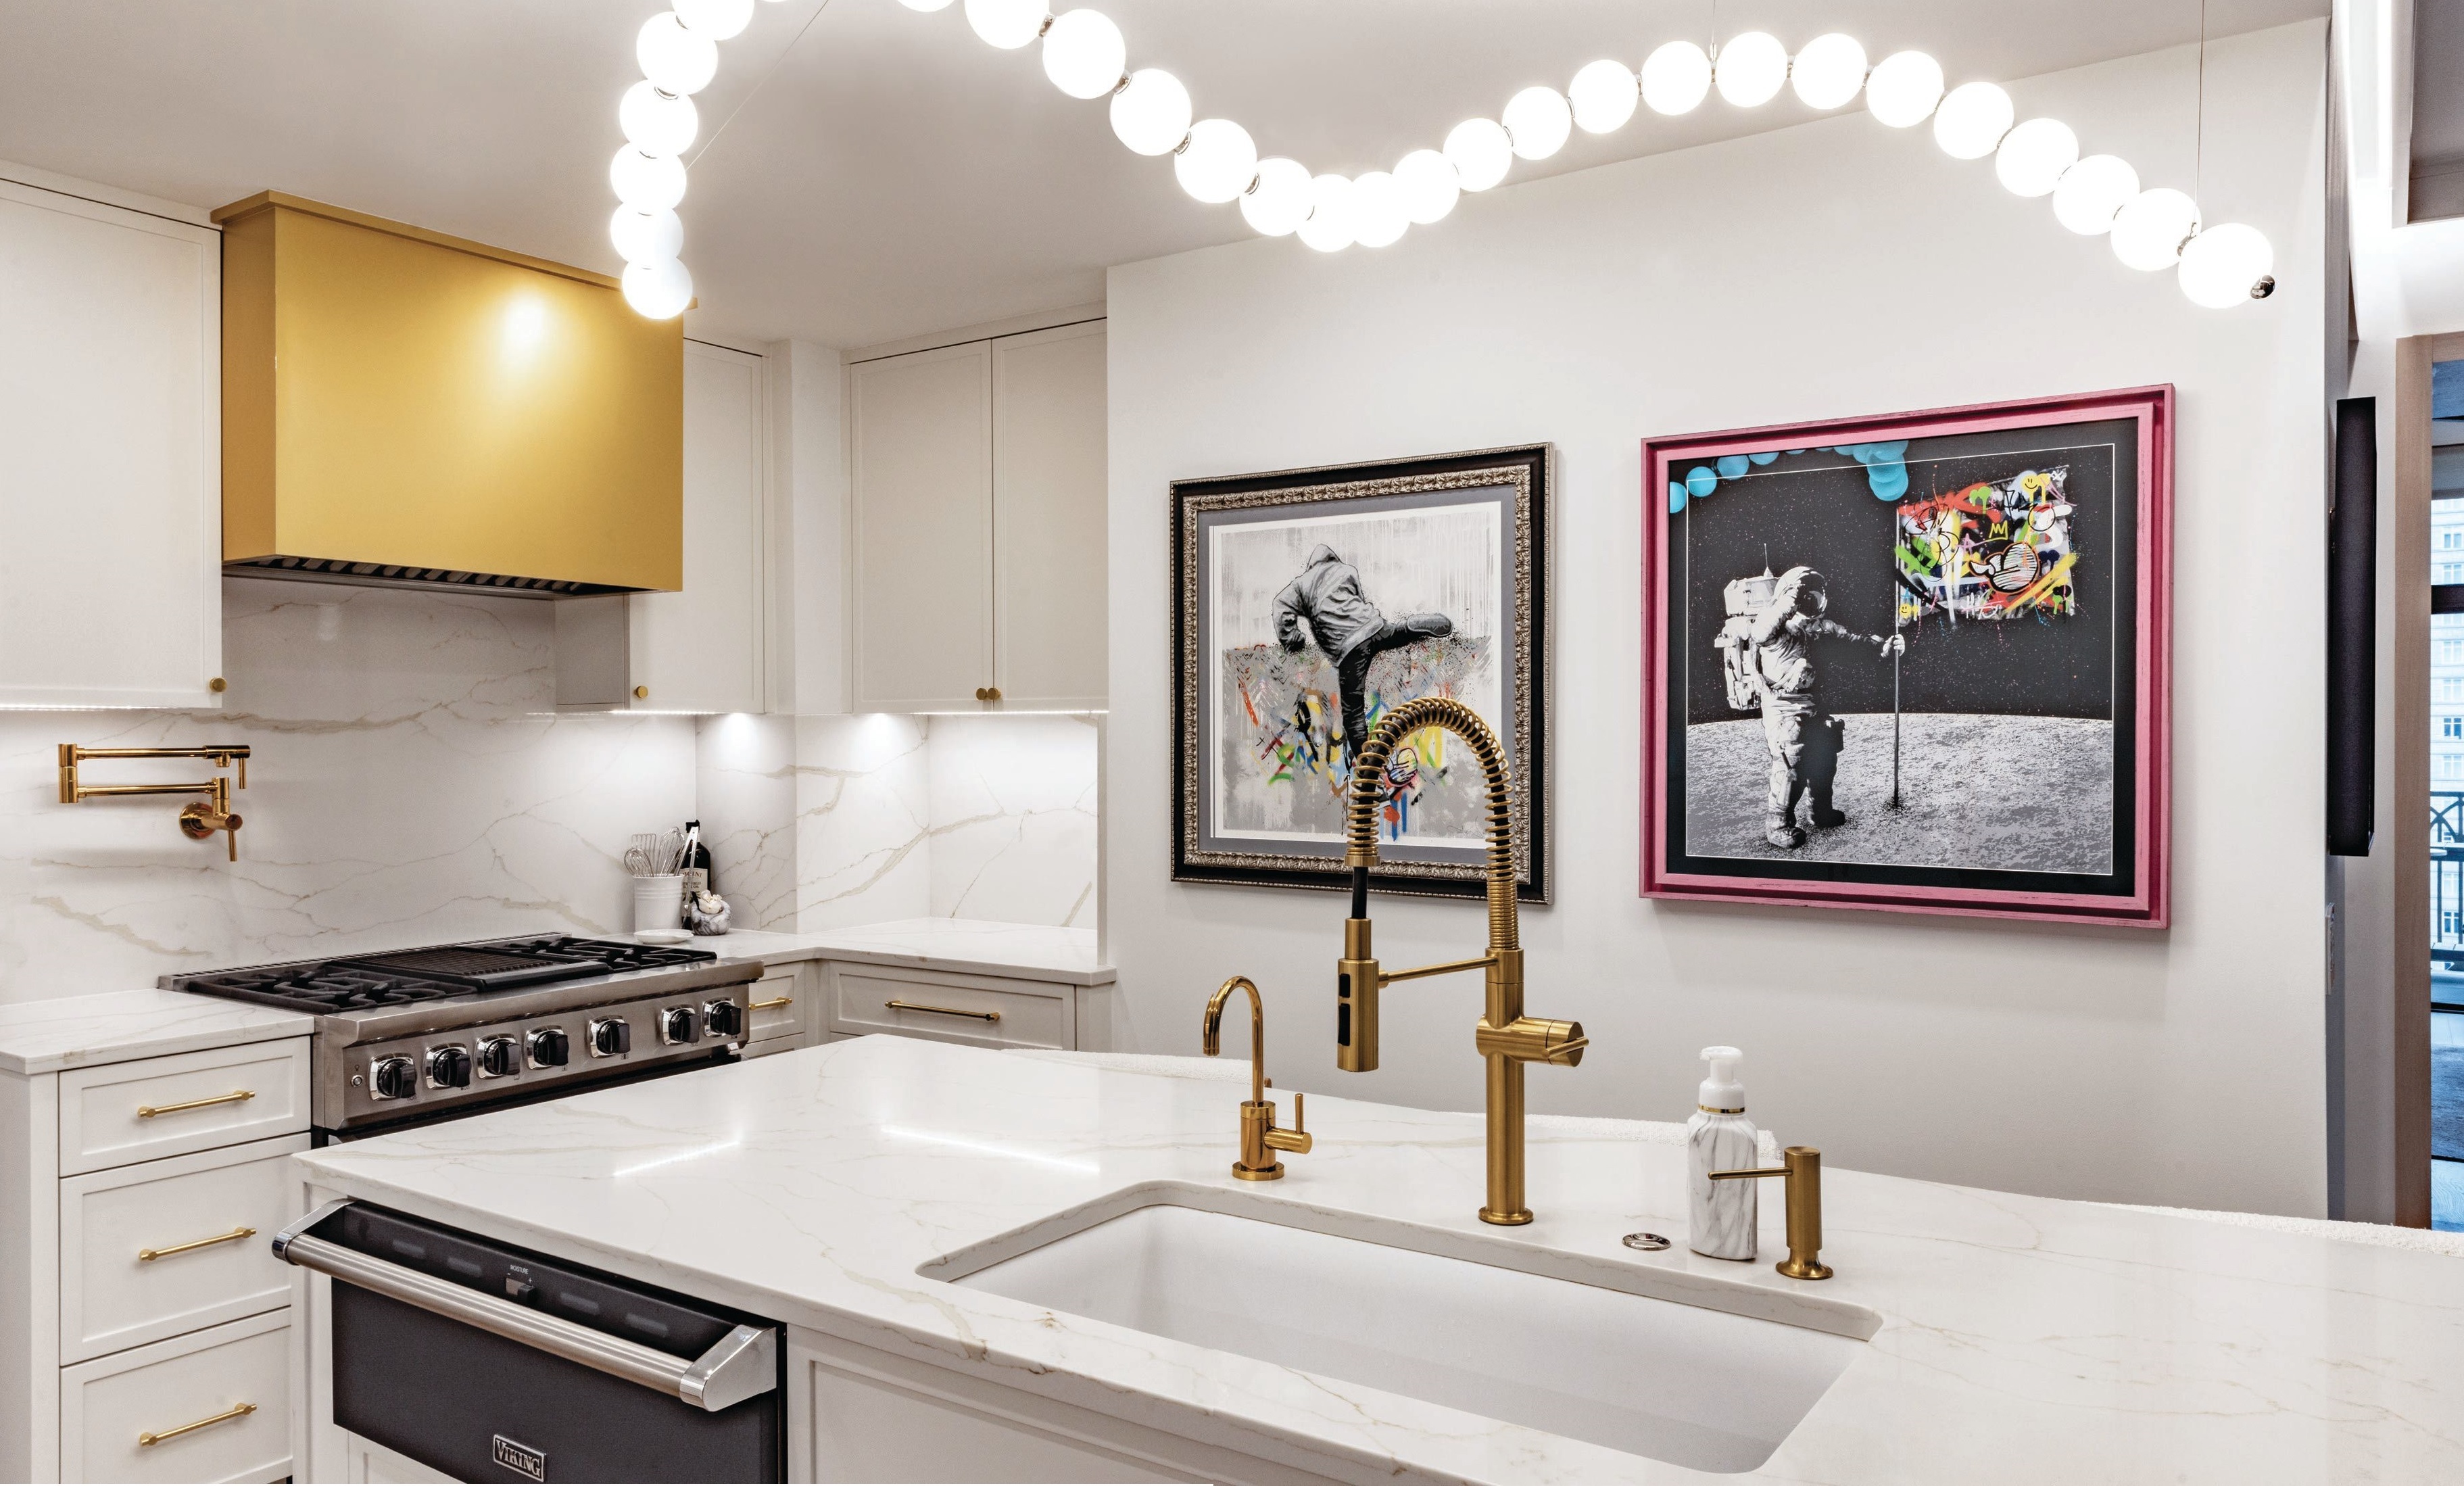 The client’s extensive art collection is featured even in the primary kitchen, where Martin Whatson’s “Climber (Hand Finished)” and “One Small Step (Pink)” add colorful contrast to an Akoya linear chandelier and Difiniti quartz countertops in Pietrasanta Gold. Photographed by Kyle Flubacker